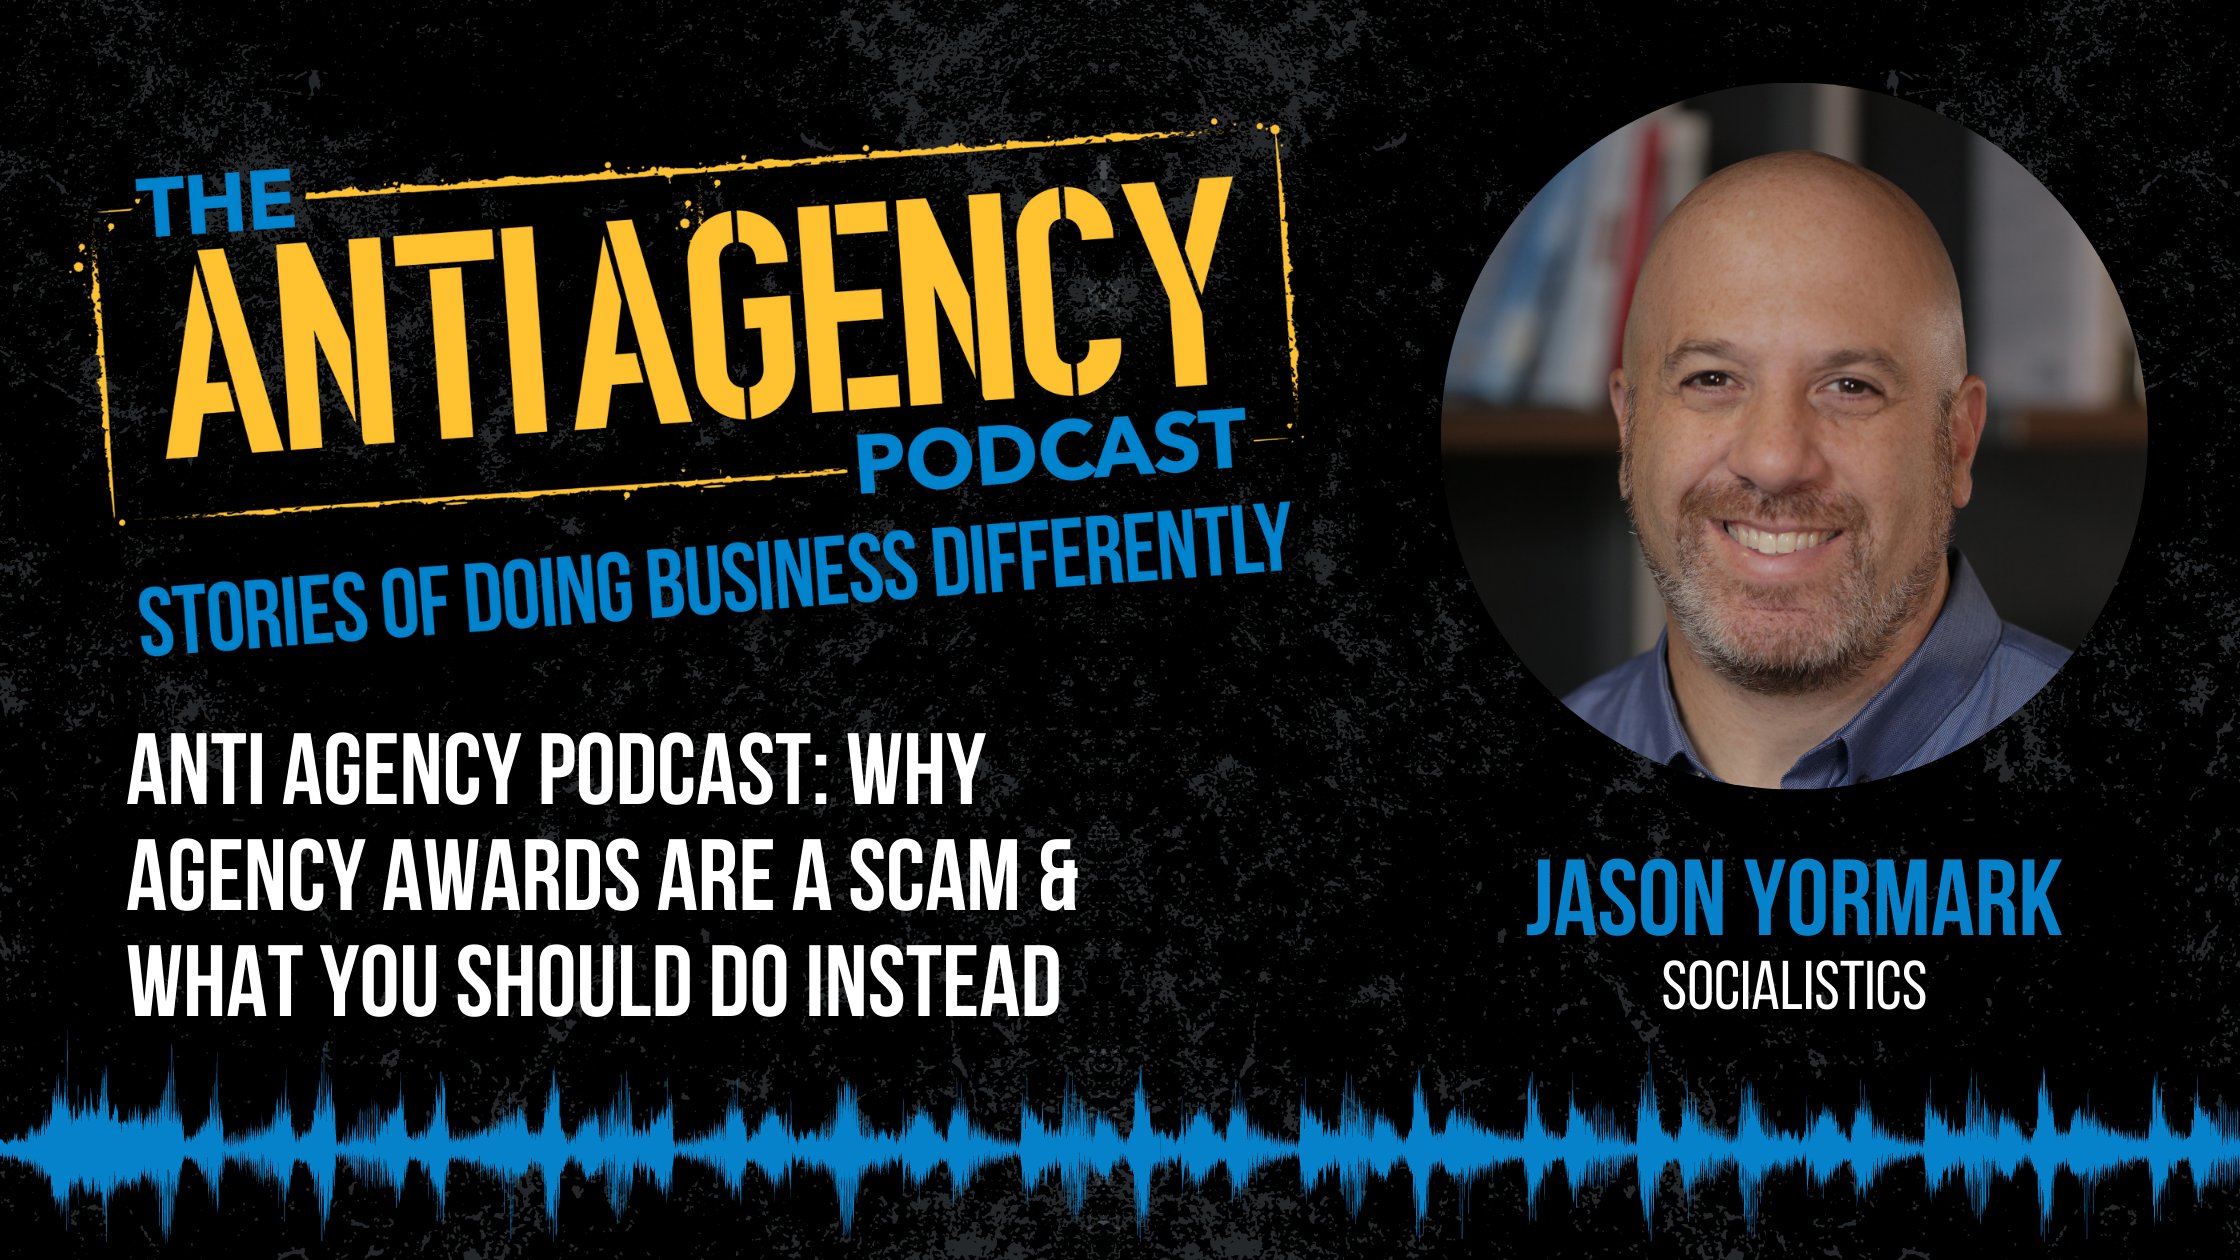 Anti Agency Podcast: Why Agency Awards Are A Scam & What You Should Do Instead